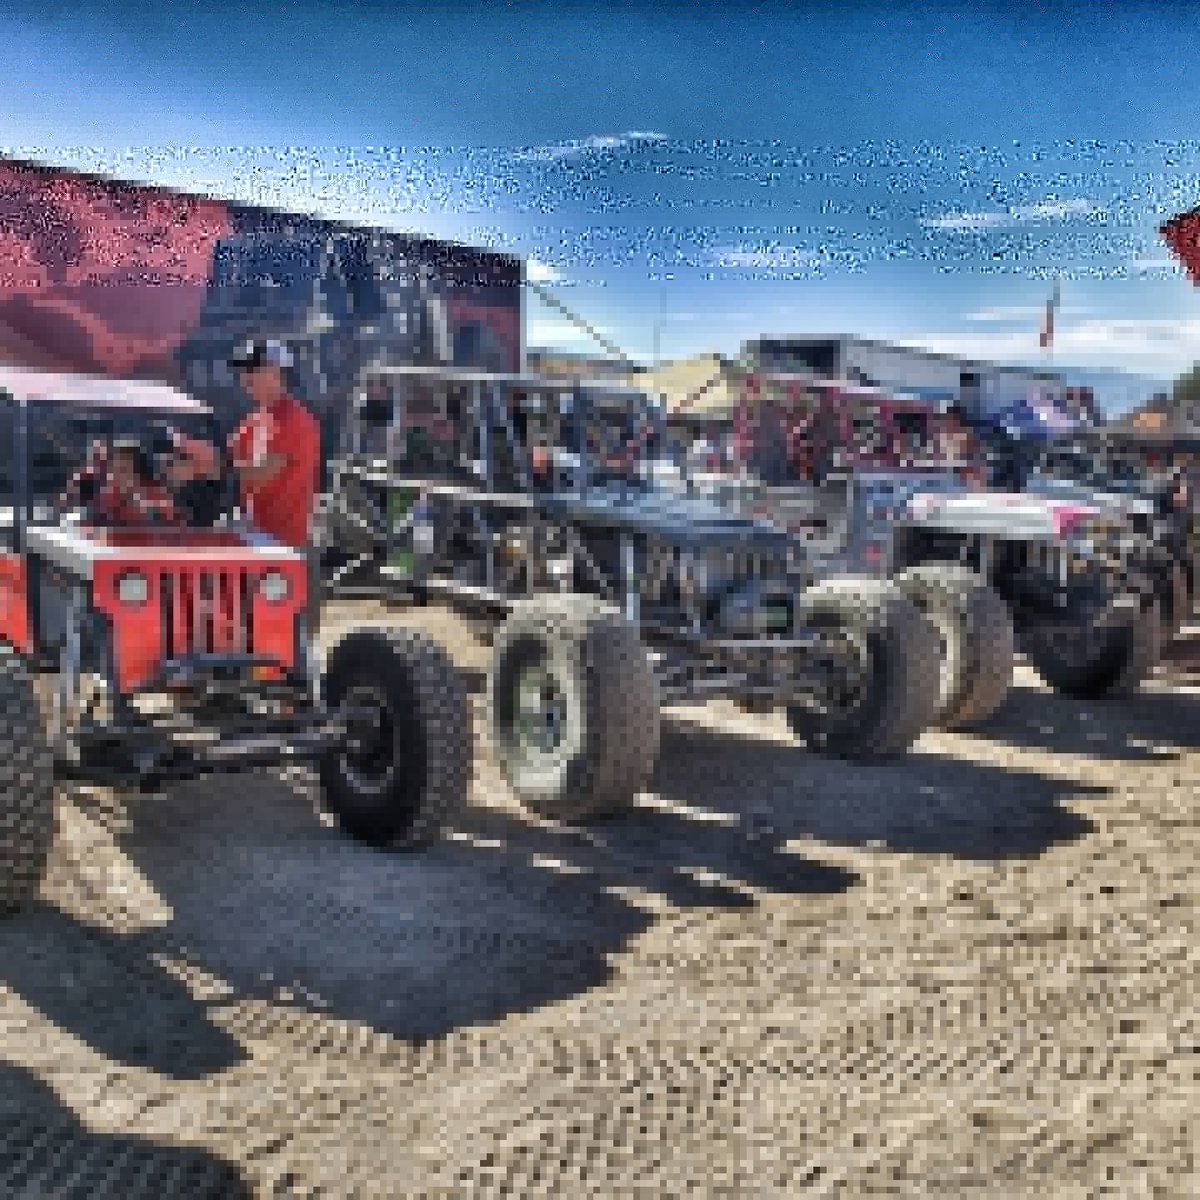 We are #ready to #rock and not #roll at the #werocklive #western #series round 2!

#girlsgetdirtytoo #vixennation 
@offagain4x4 
@jencordesigns 
@offroadvixens 
@treadworks 
@4x4tricks 
@crawlorado 
@jbaoffroad 
@summitmachine 
@superchips_official